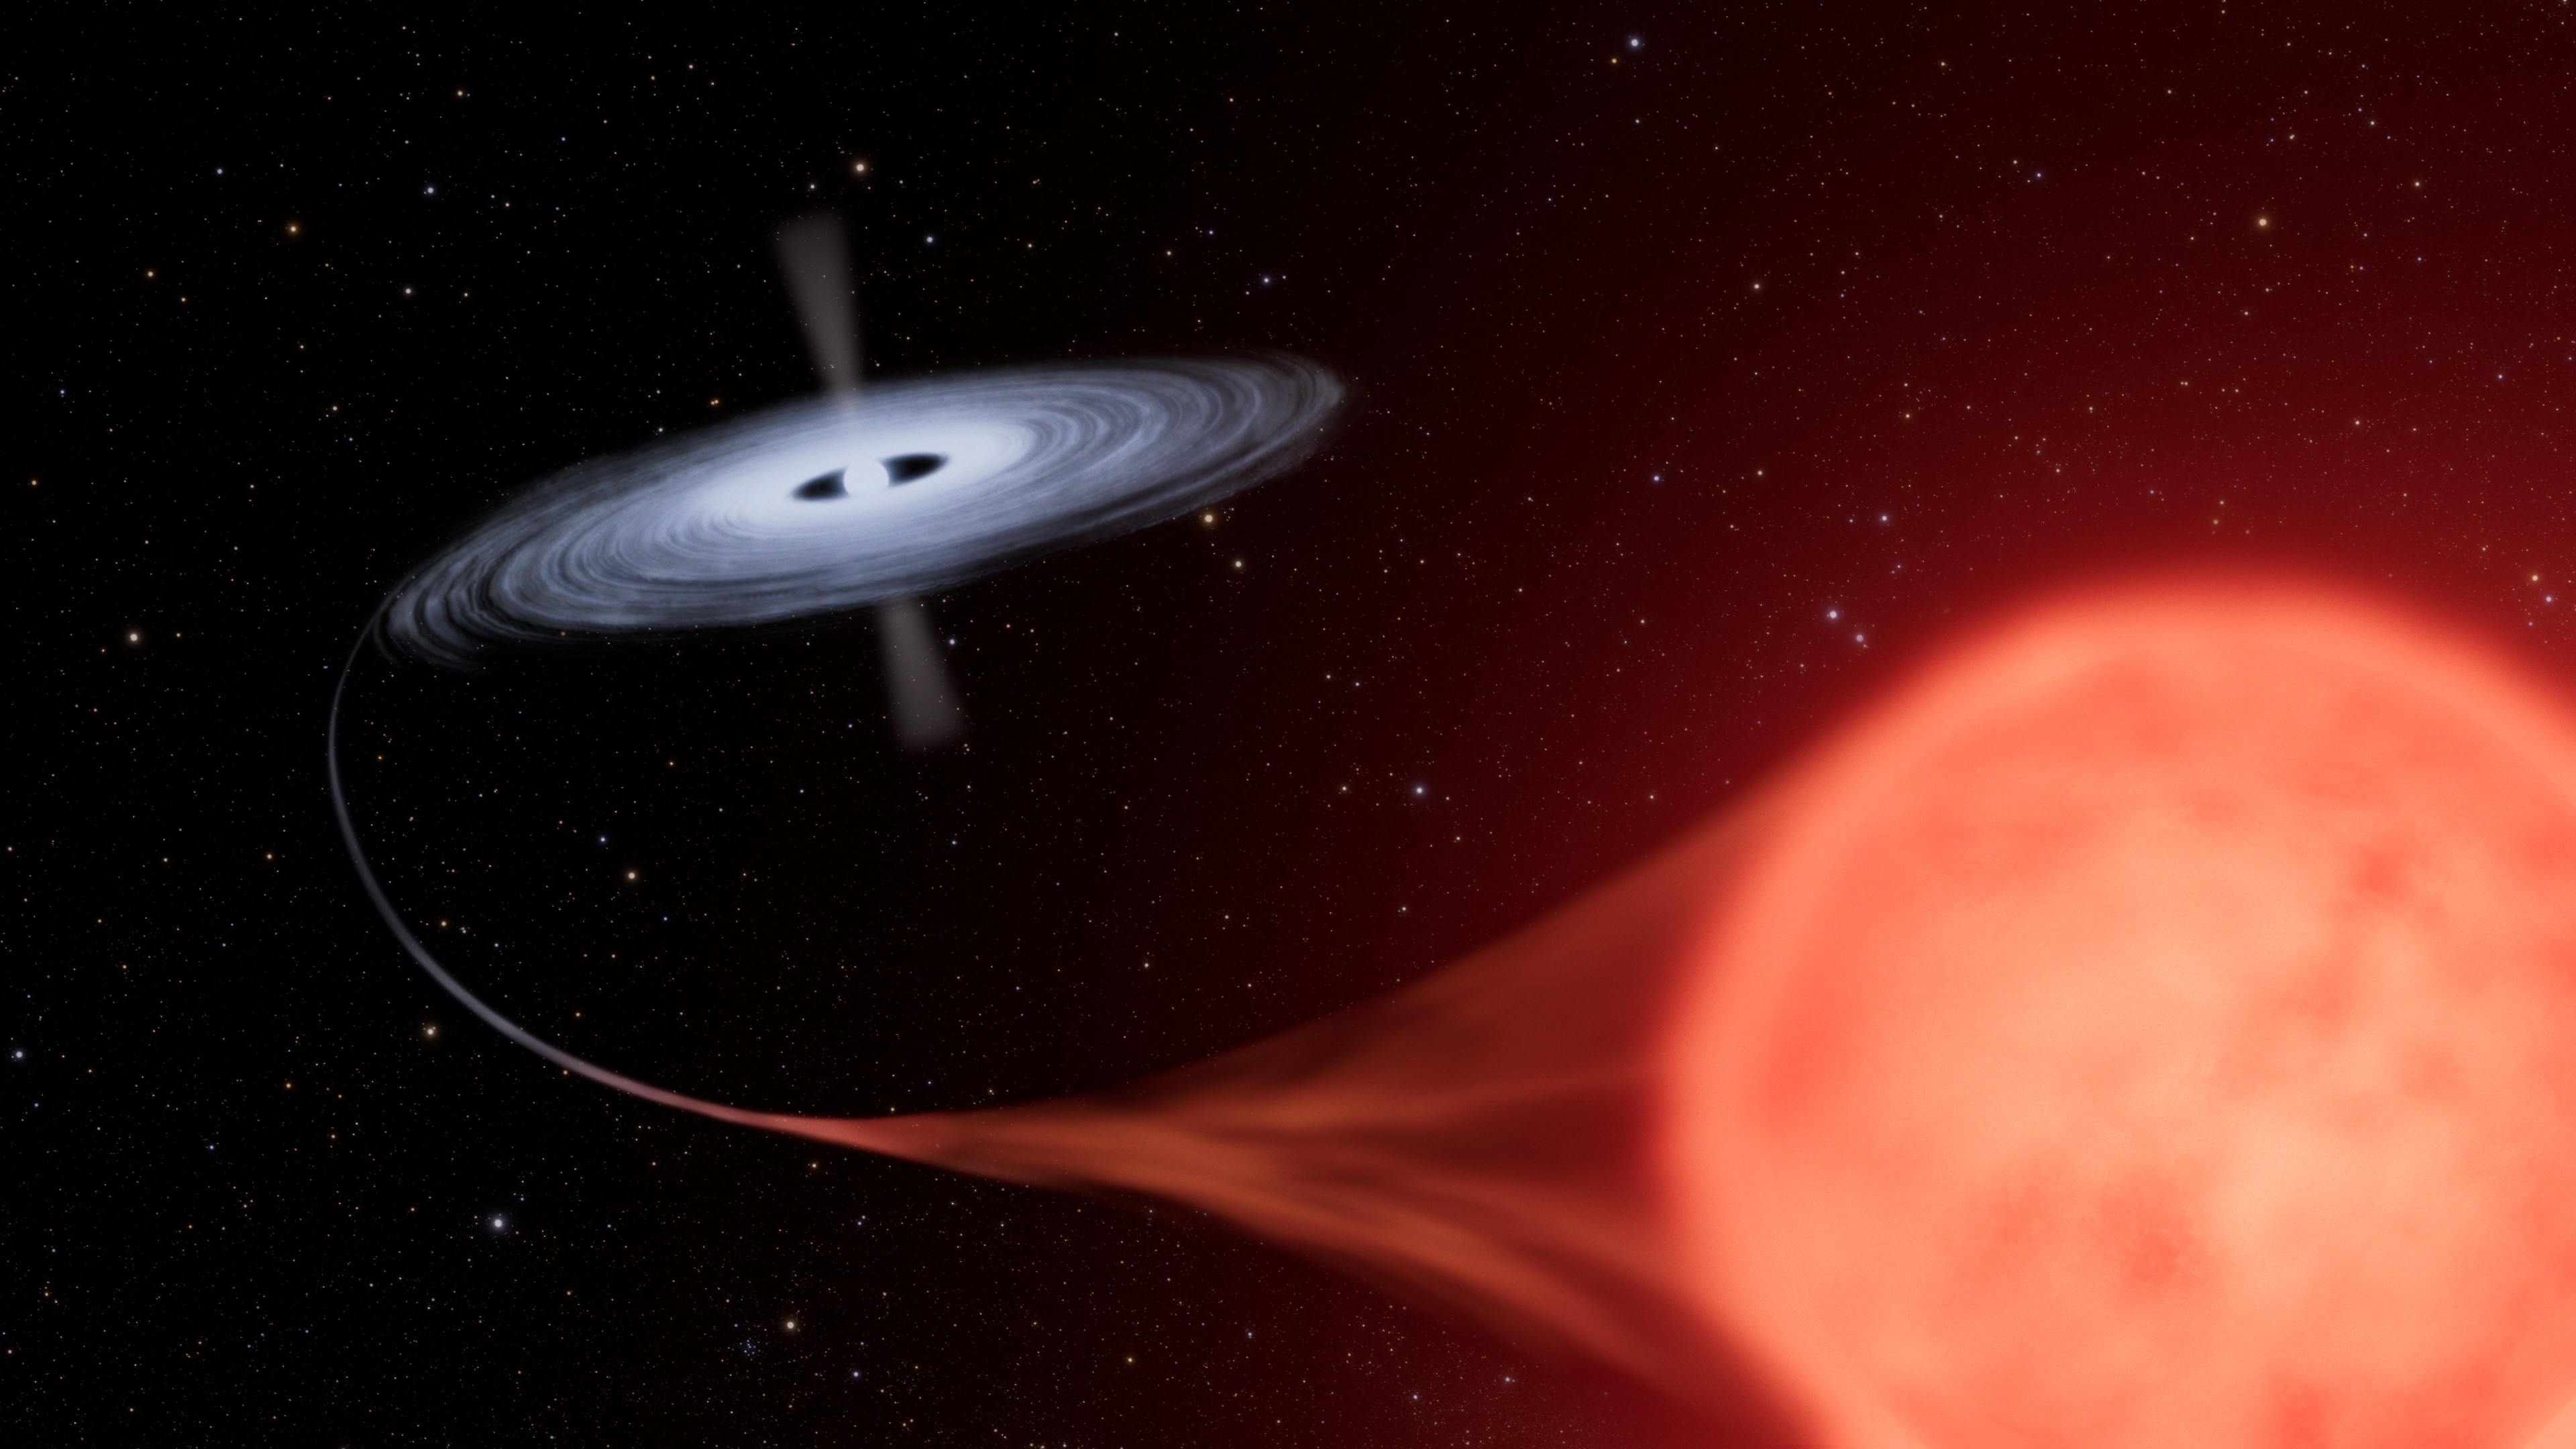 An artist's concept of the binary star system HM Sge on the black background of space sprinkled with various sizes of red and white points of light. At the top of the image a blazing hot white disk surrounds a white dwarf star that is pulling a stream of material from its red giant companion, the glowing mottled ball at bottom right.